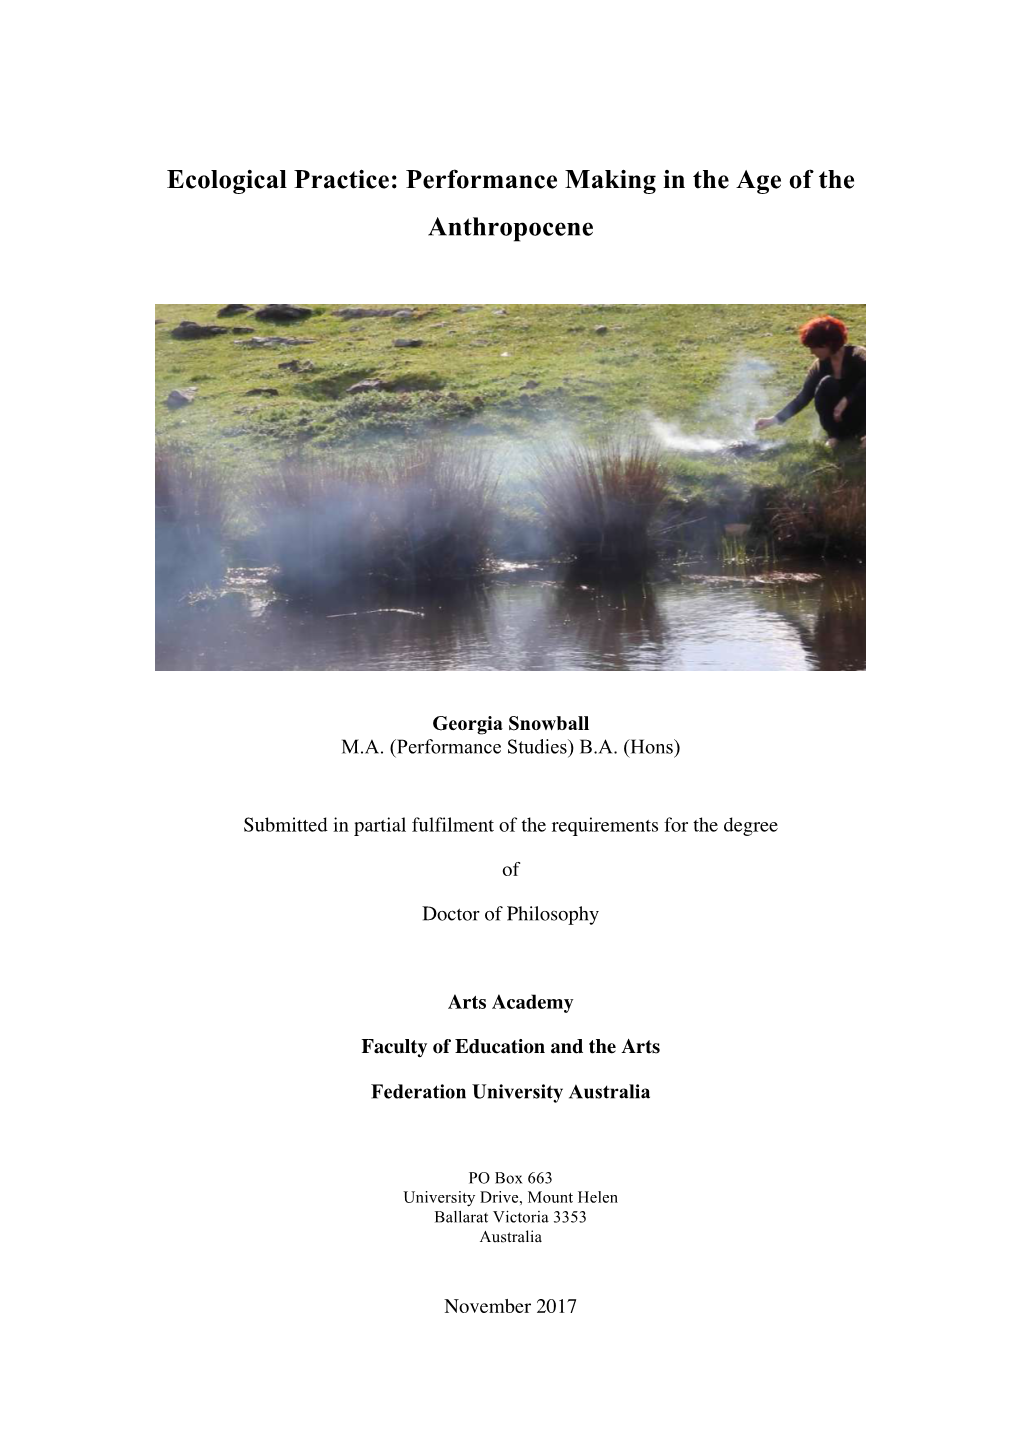 Performance Making in the Age of the Anthropocene